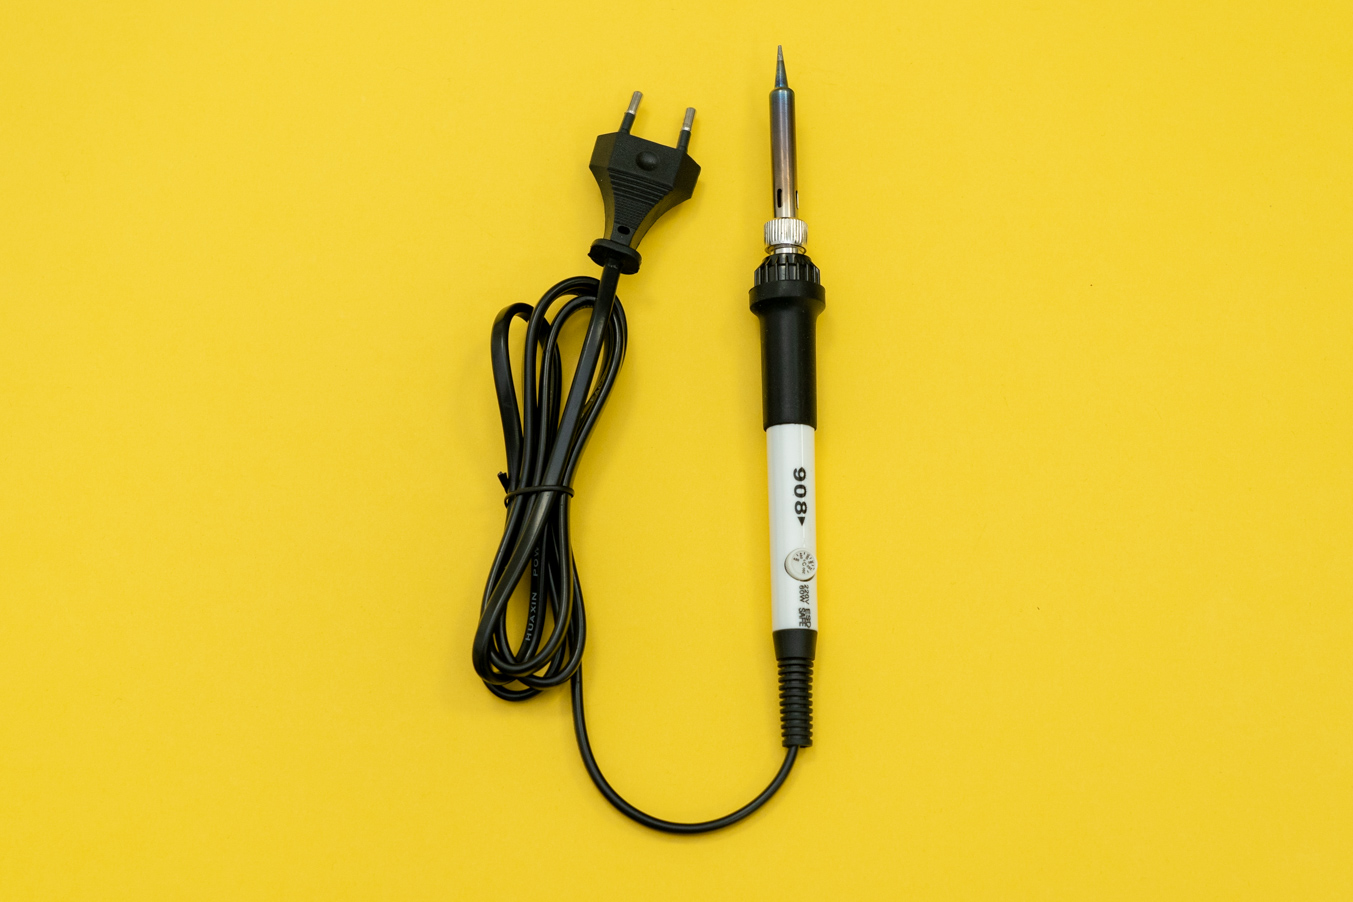 The soldering iron from the Tools pack